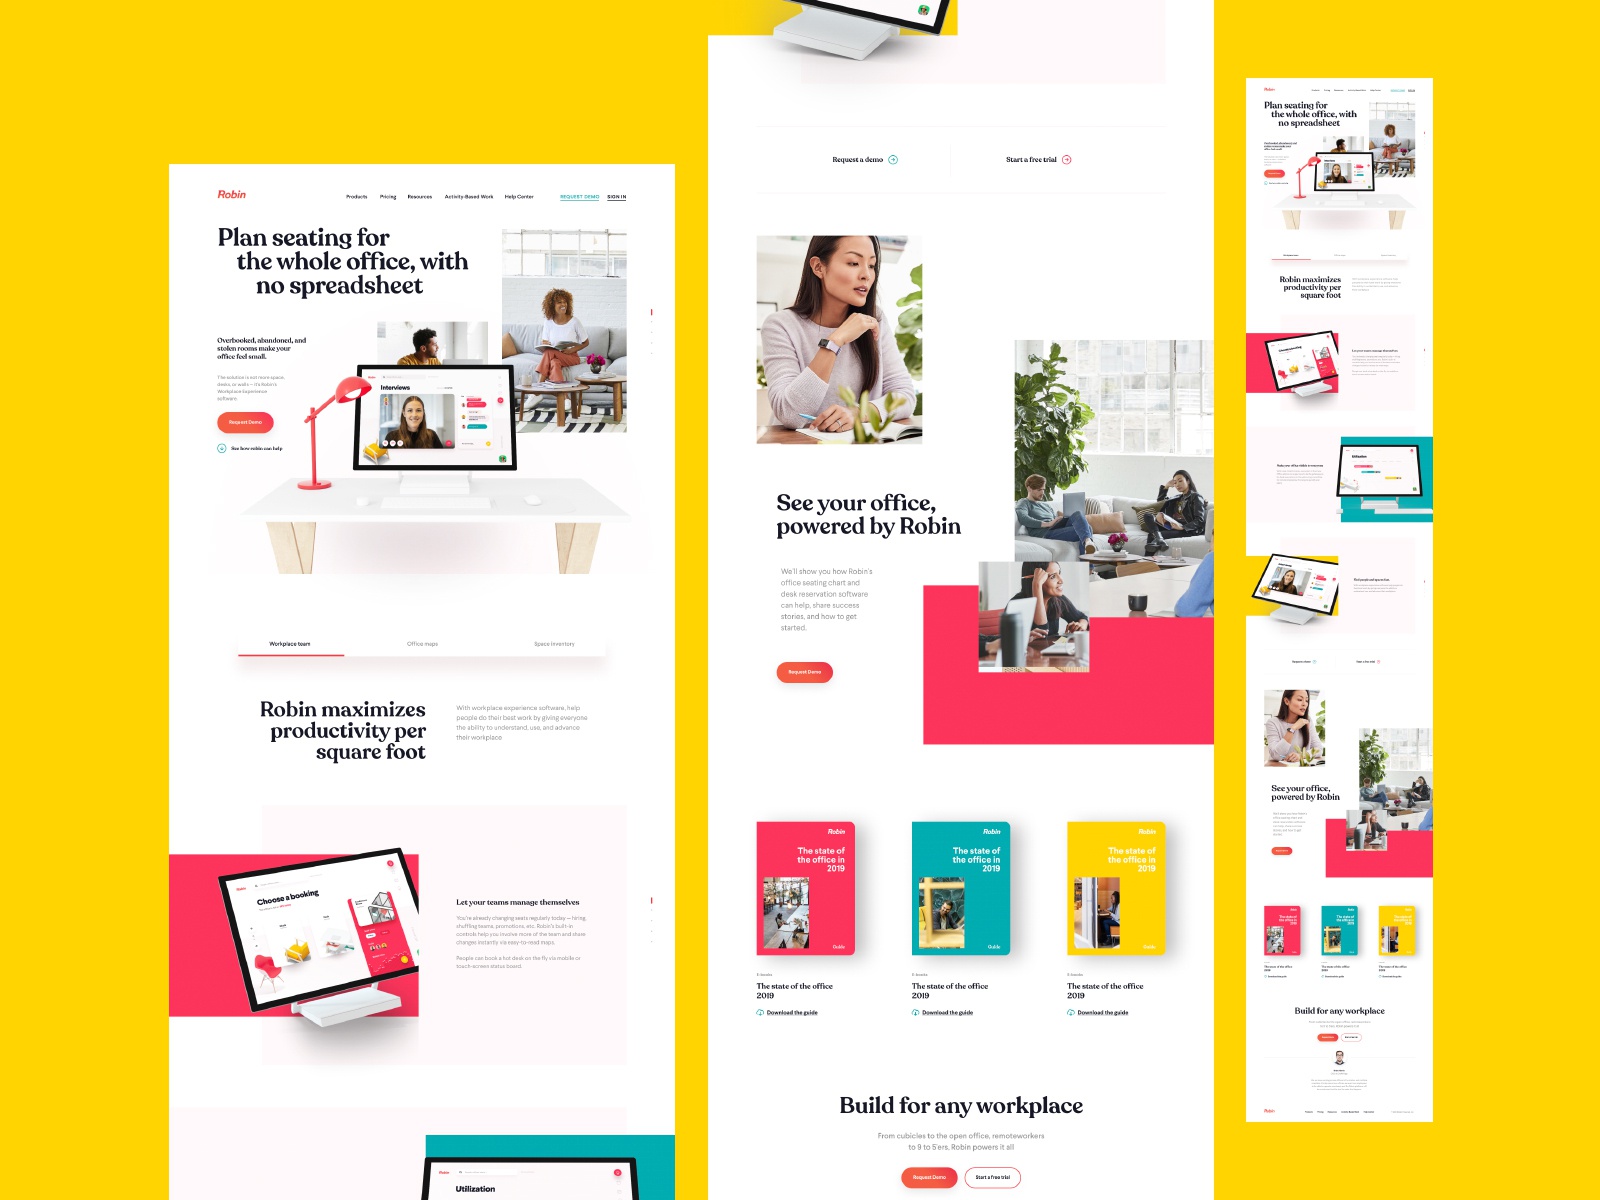 Office, Workspace Feature&#39;s Page Design / New Robin&#39;s website